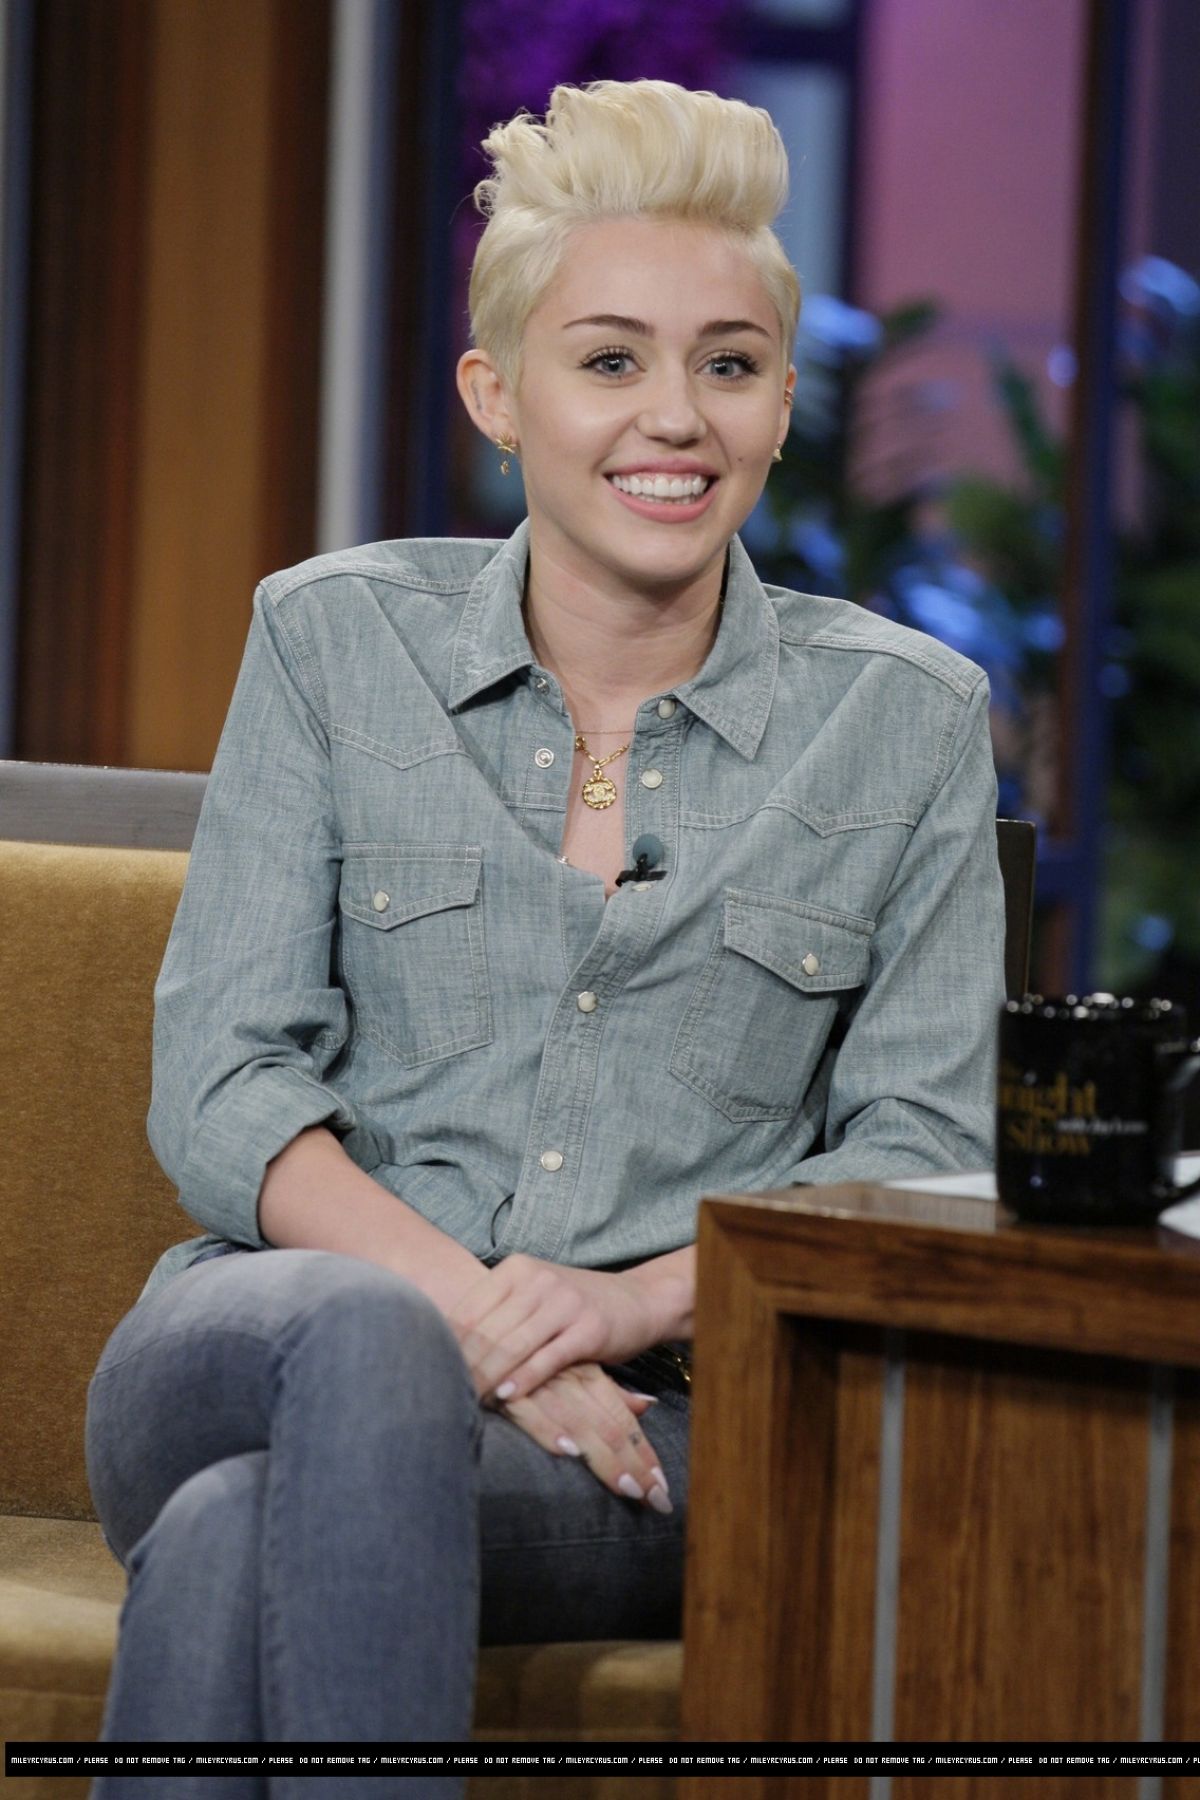 MILEY CYRUS at The Tonight Show with Jay Leno - HawtCelebs